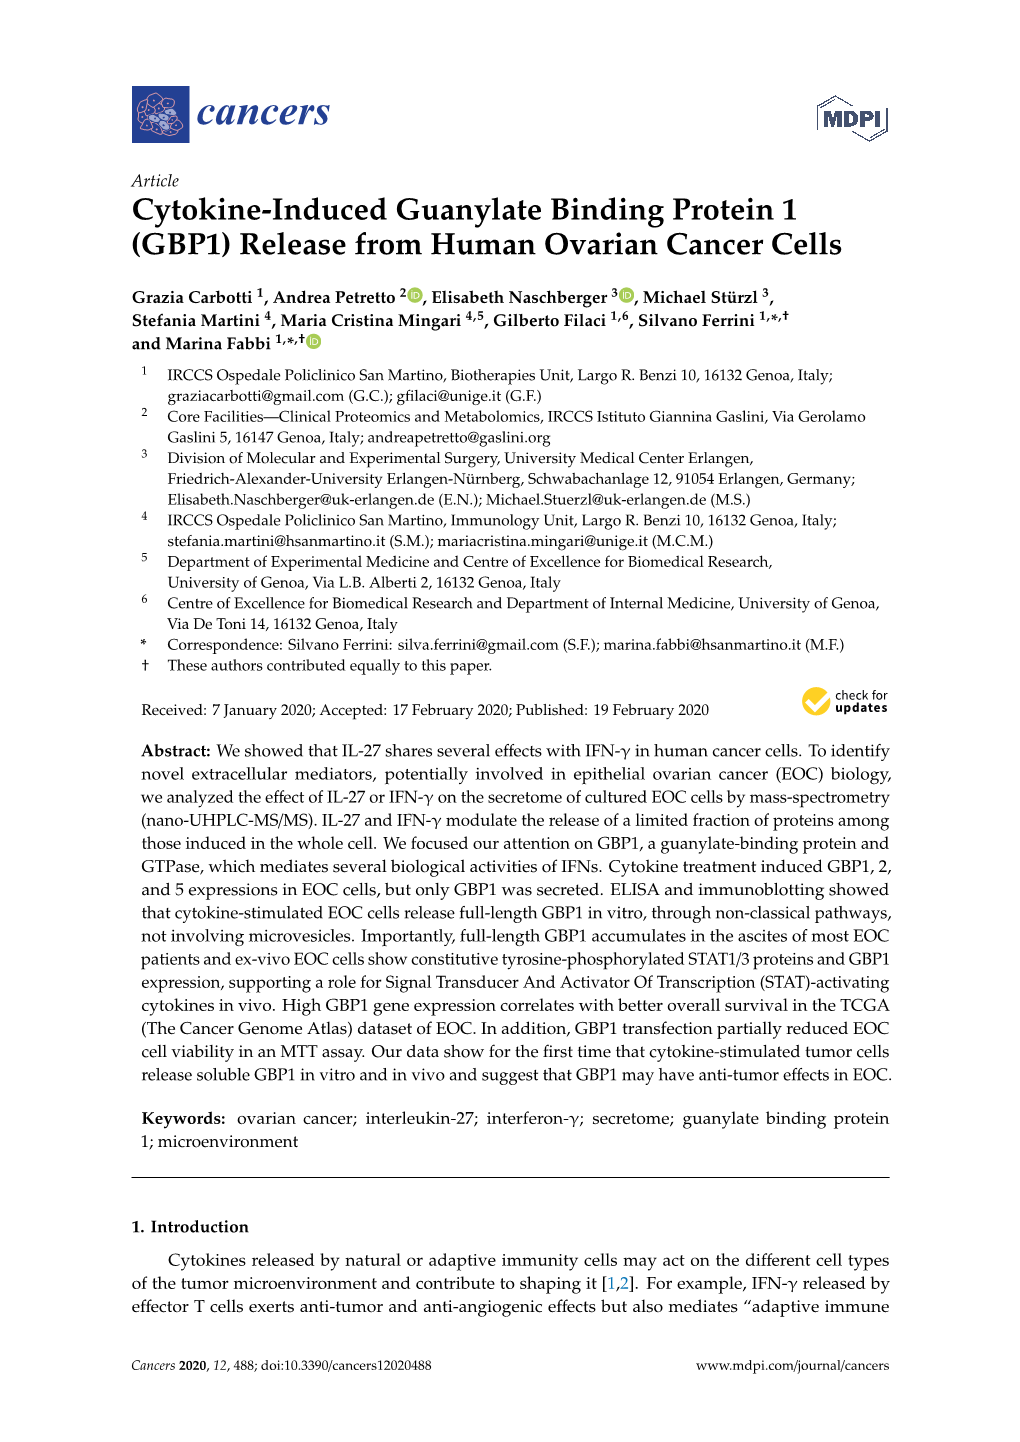 Cytokine-Induced Guanylate Binding Protein 1 (GBP1) Release from Human Ovarian Cancer Cells